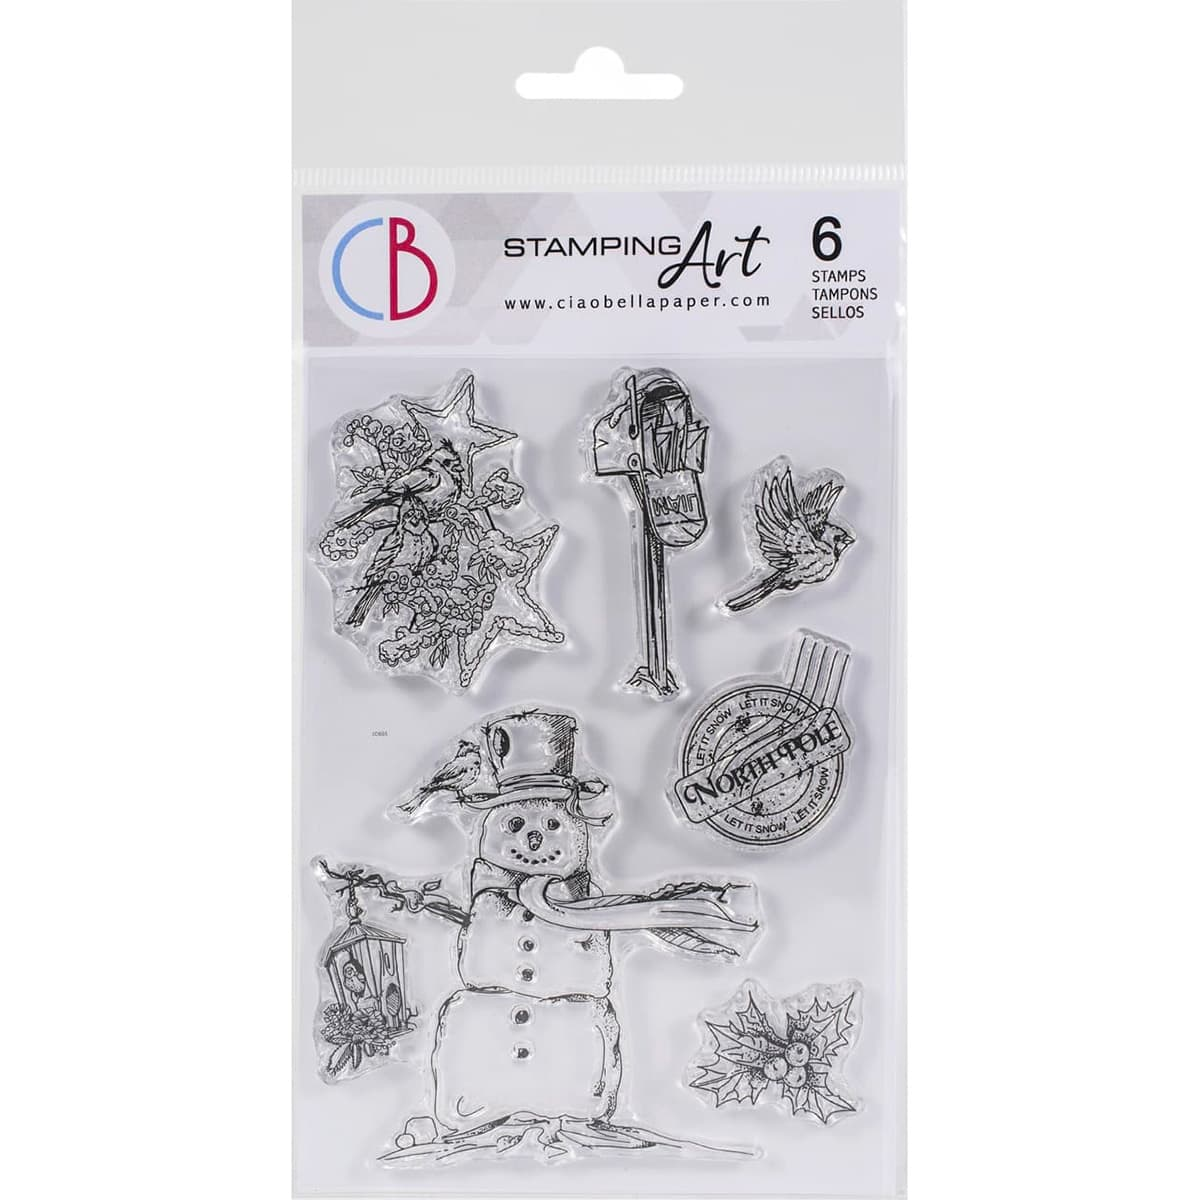 Tim Holtz Stampers Anonymous Cling Stamps Eccentric